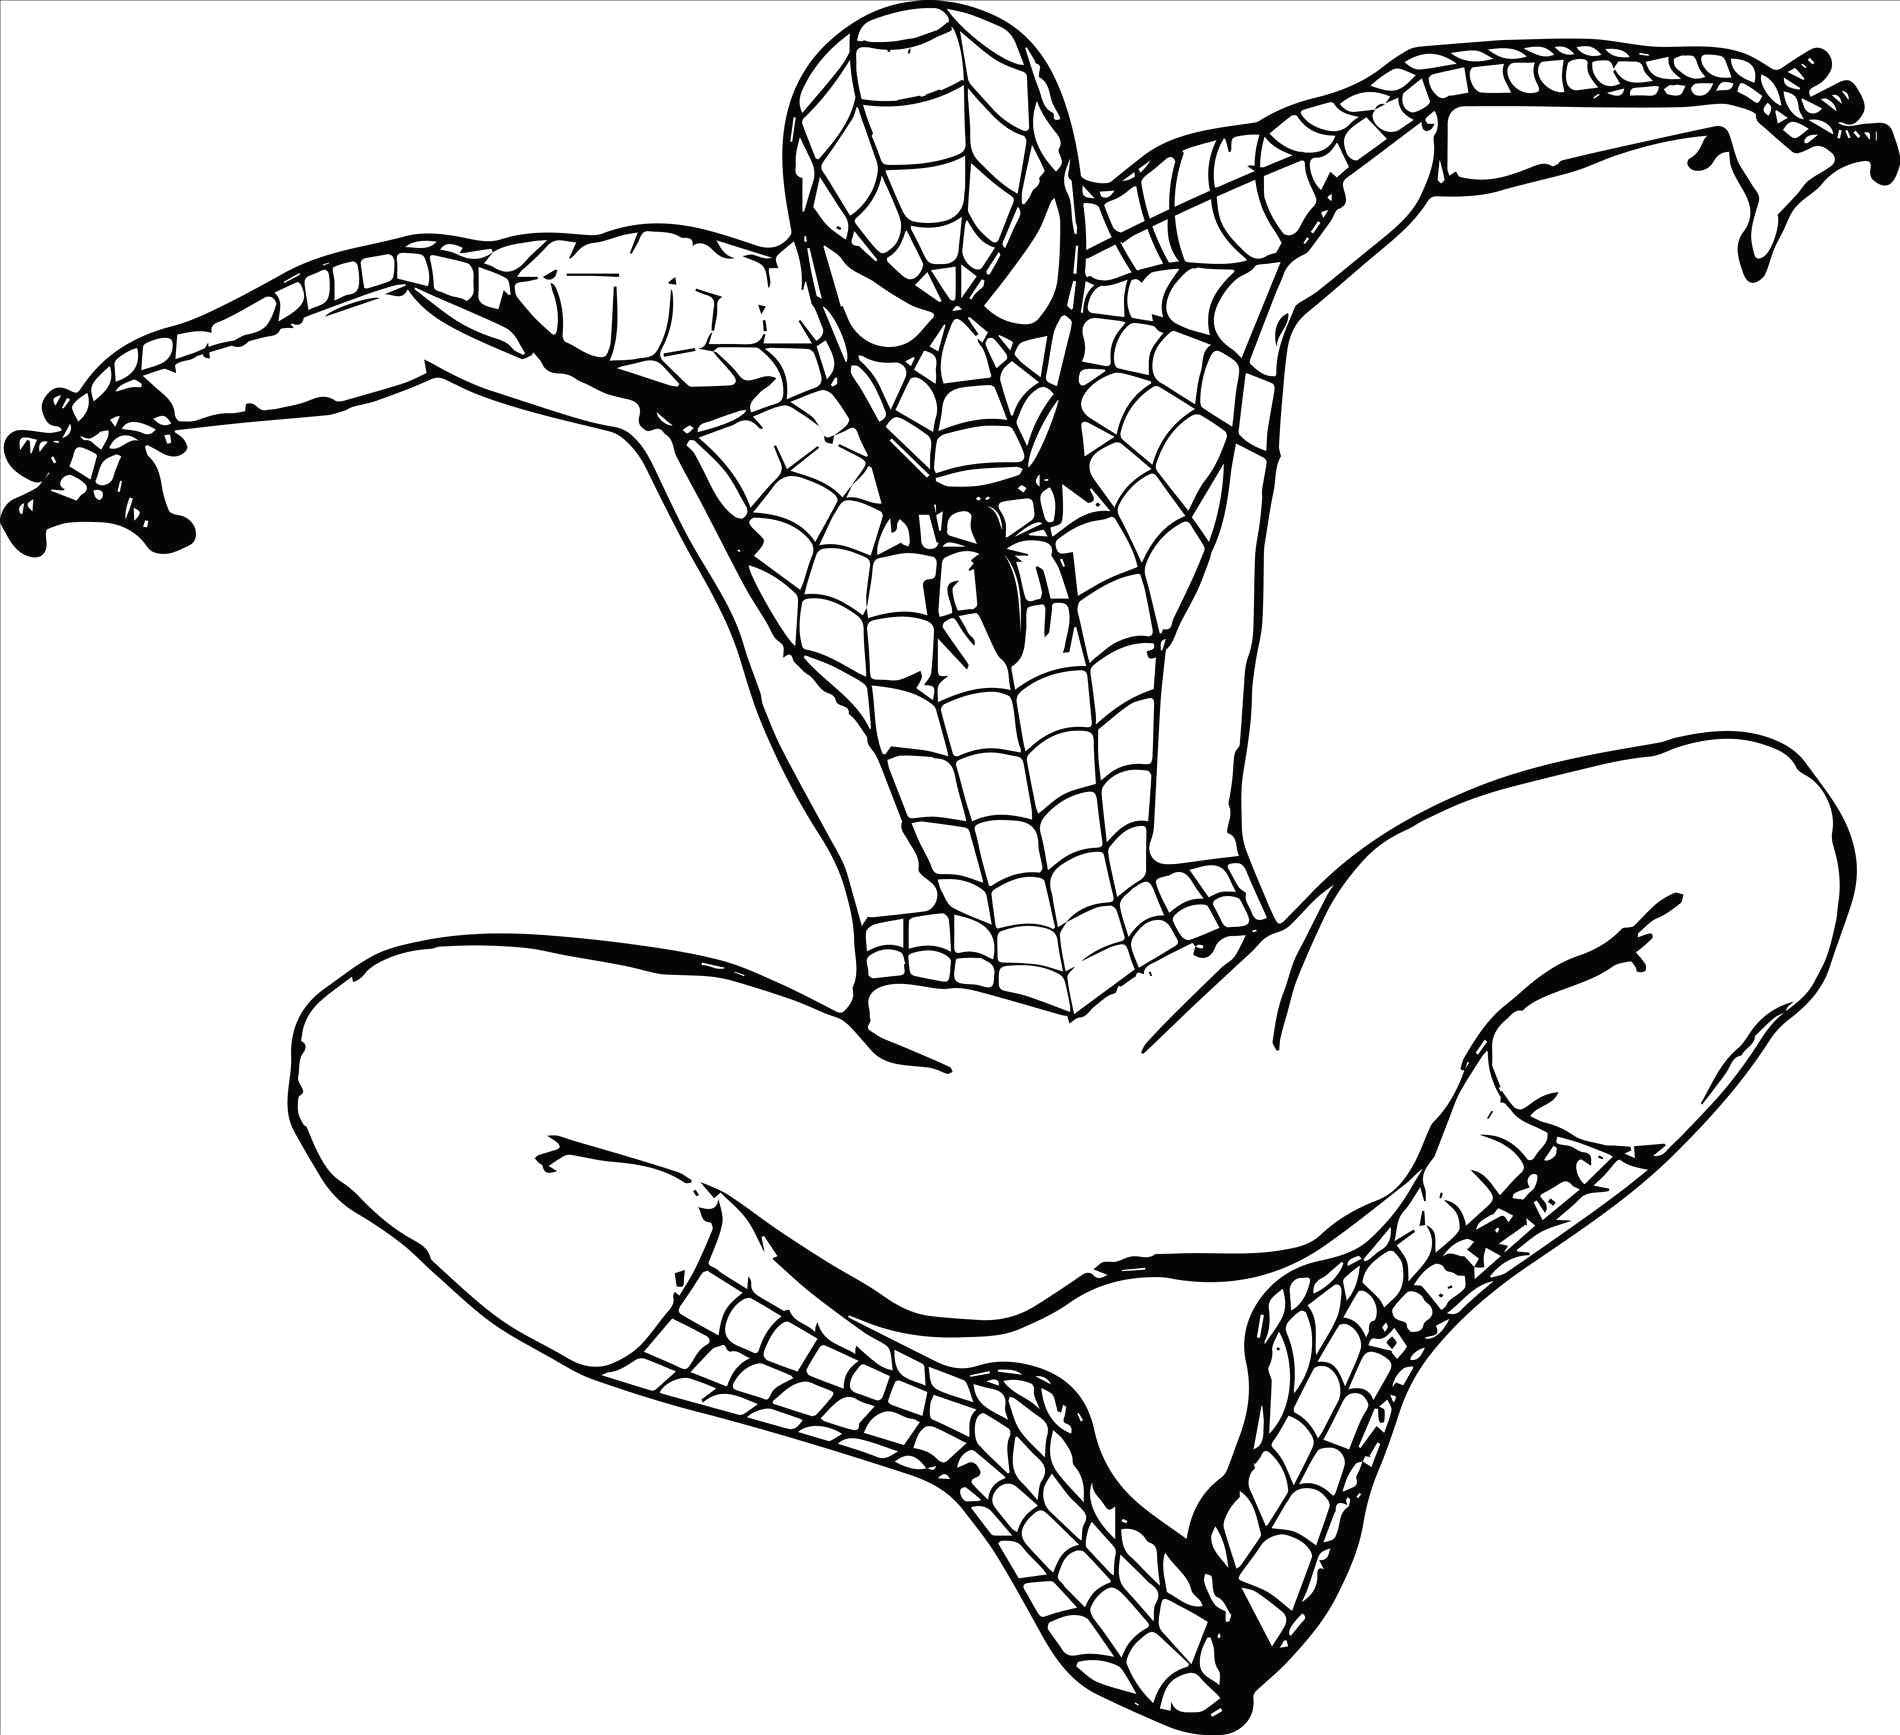 spiderman coloring pages to print luxury superheroes easy to draw spiderman coloring pages luxury 0 0d